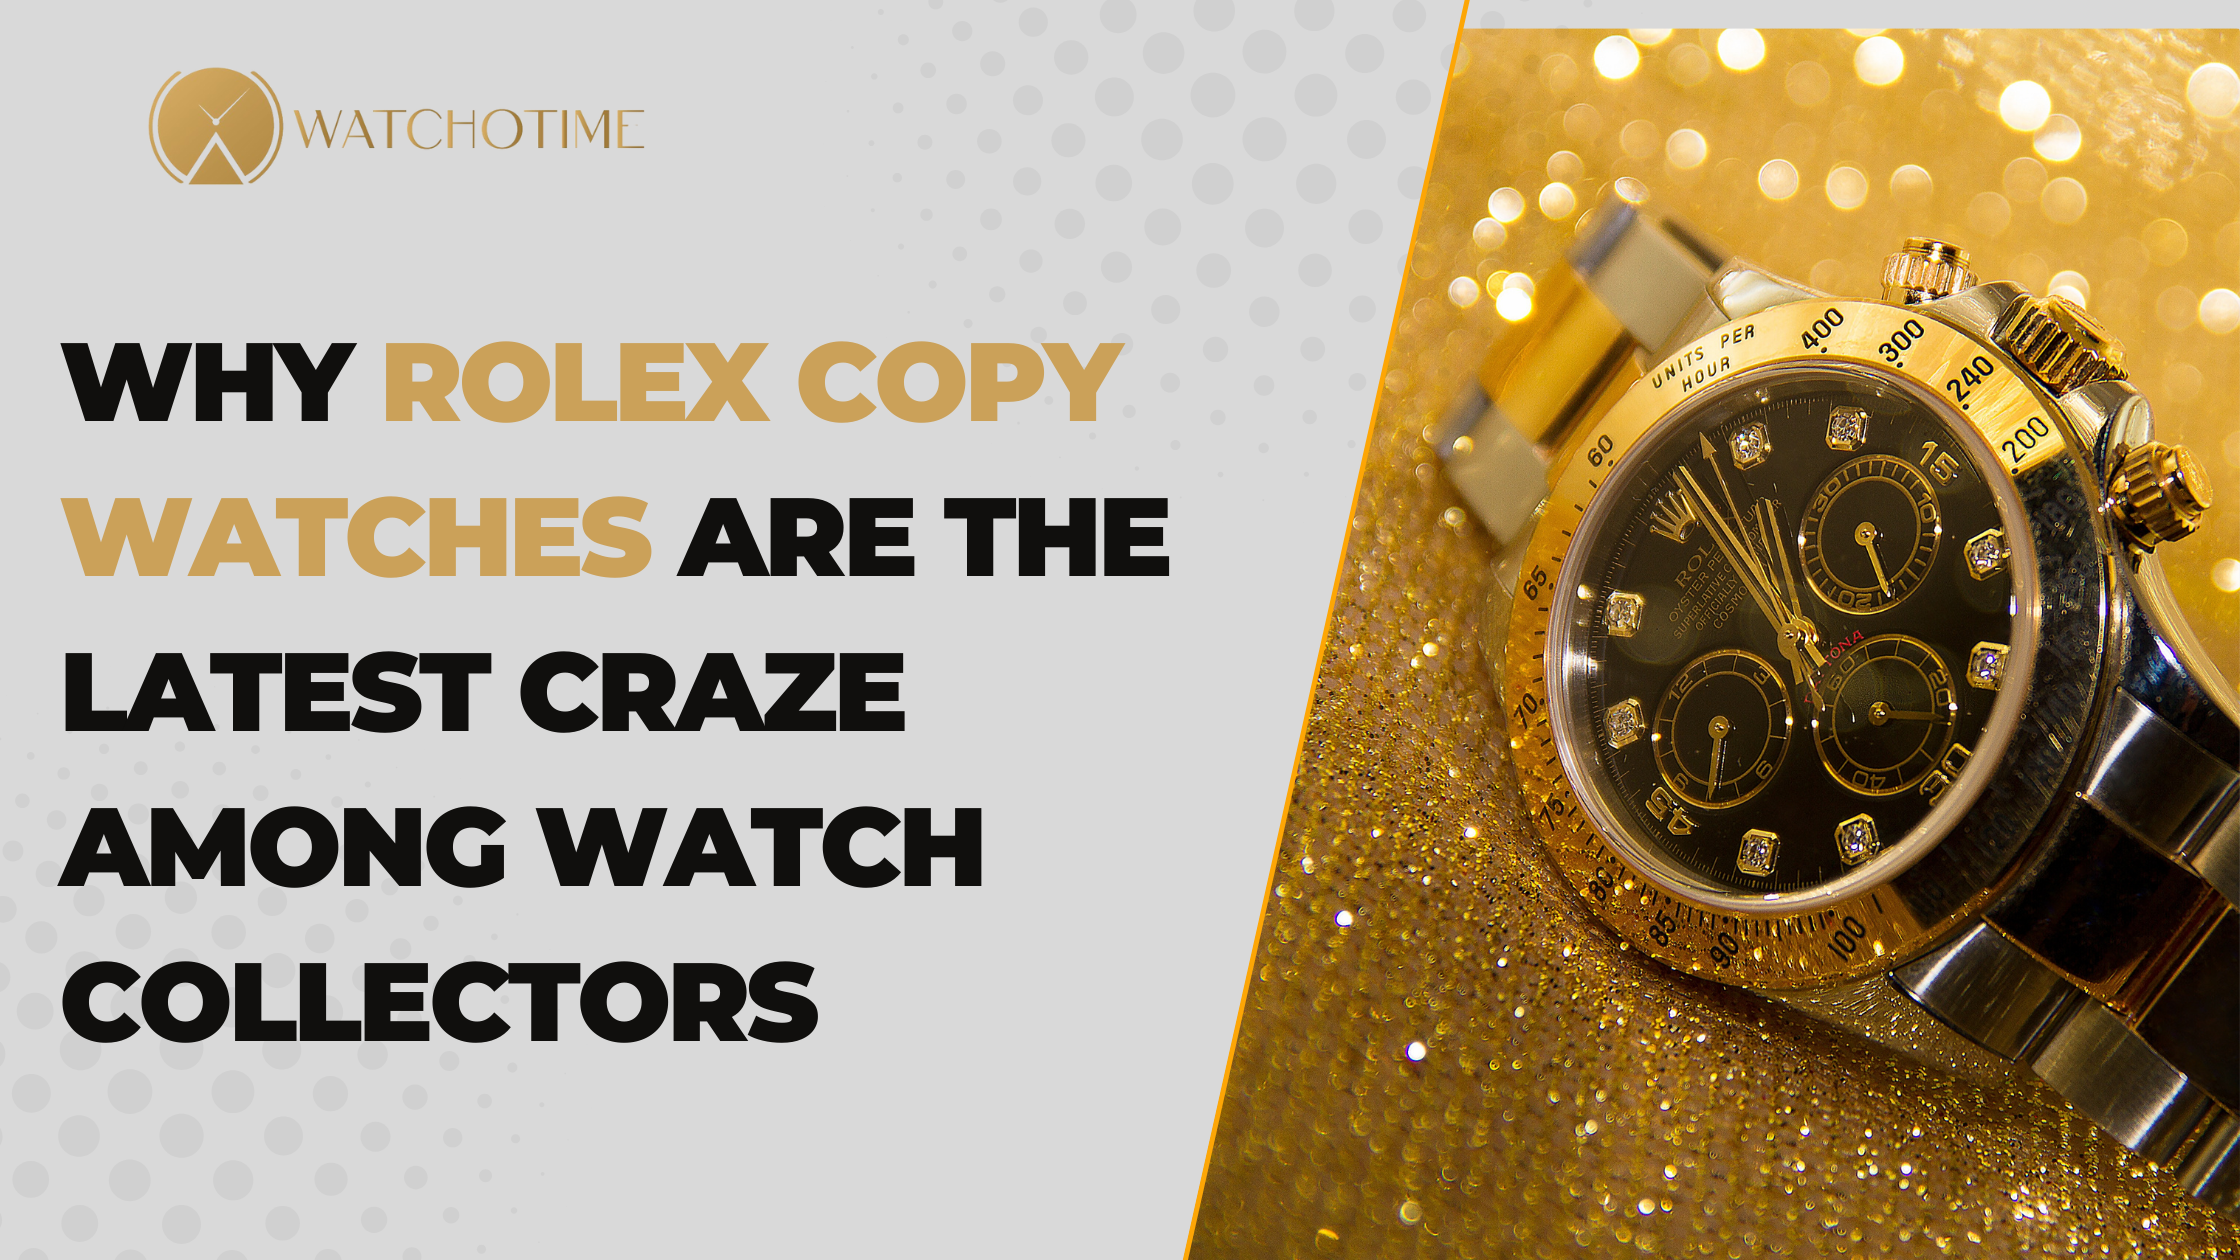 Why Rolex copy watches are the Latest Craze Among Watch Collectors